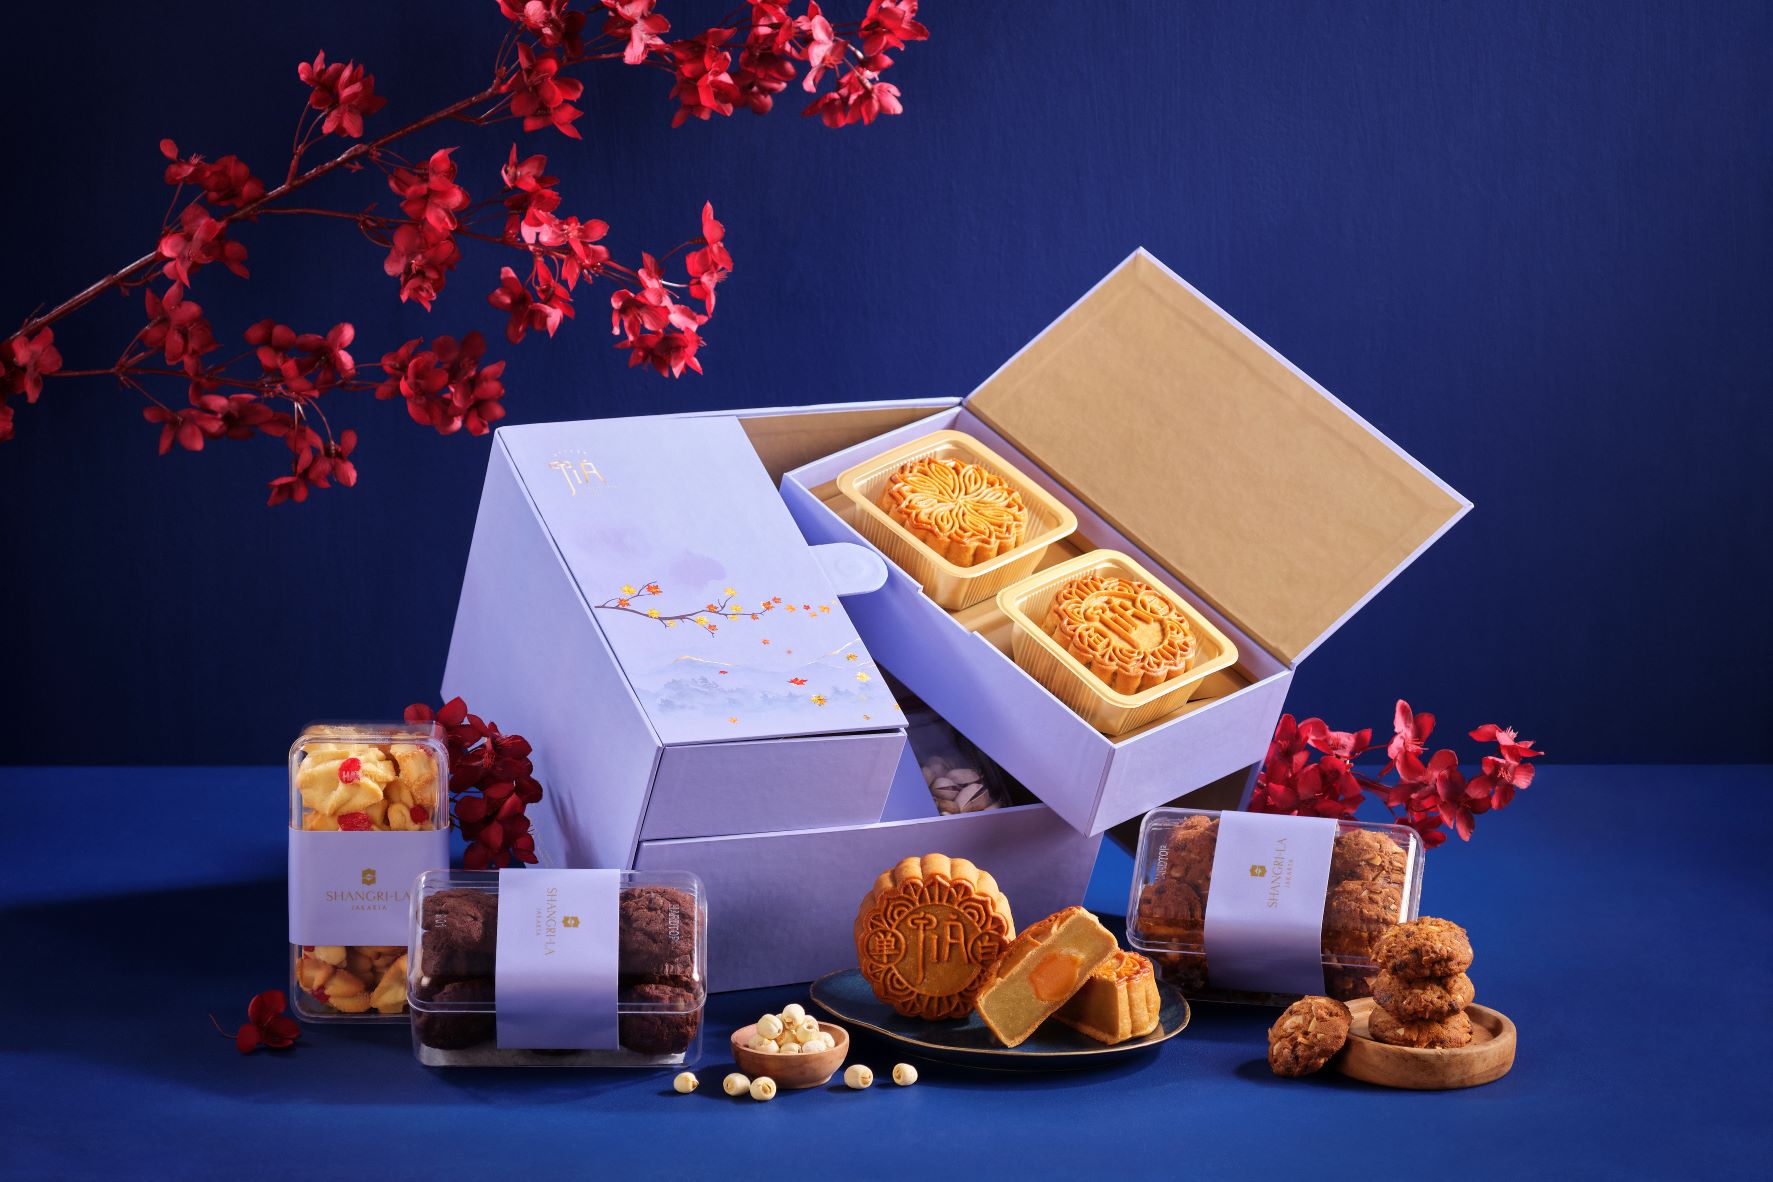 JIA Presents an Exquisite Mooncake Collections